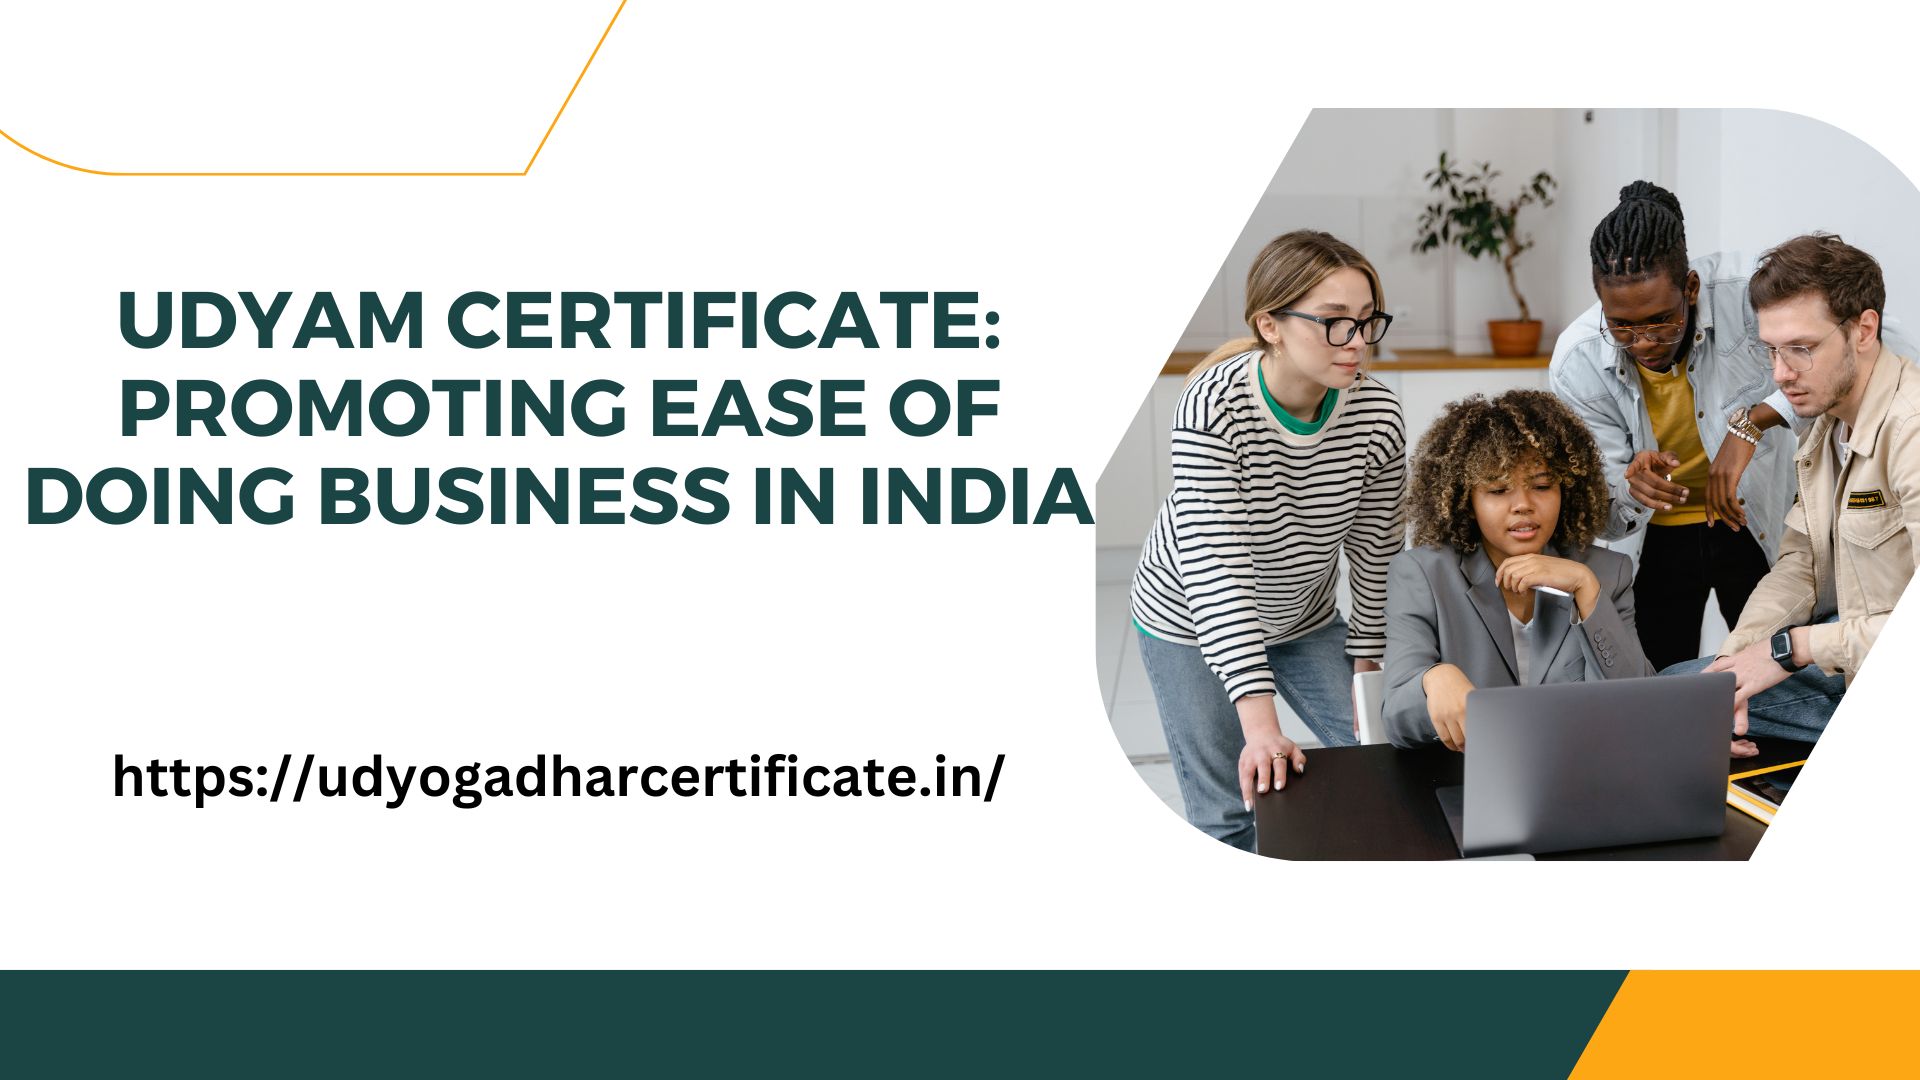 Udyam Certificate: Promoting Ease of Doing Business in India